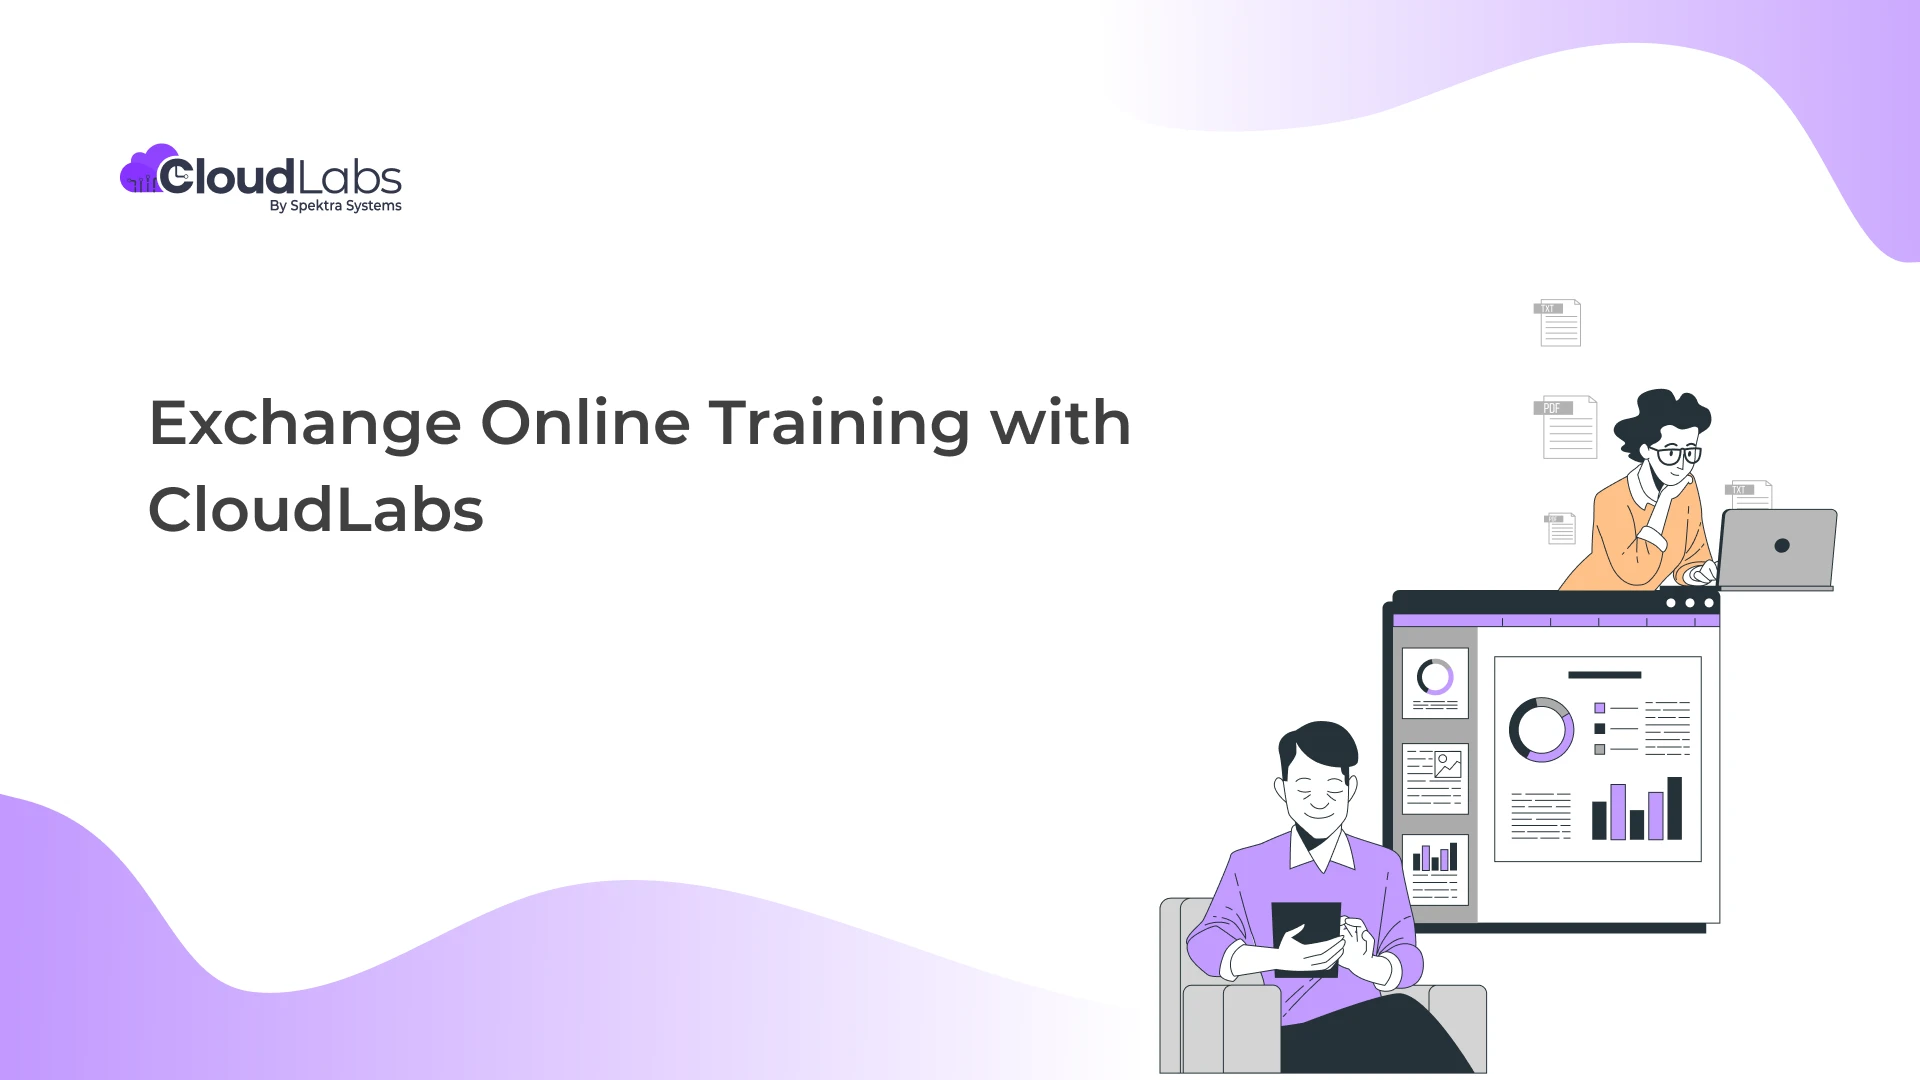 Exchange Online Training with CloudLabs - Labs, Licenses, and Benefits Explained